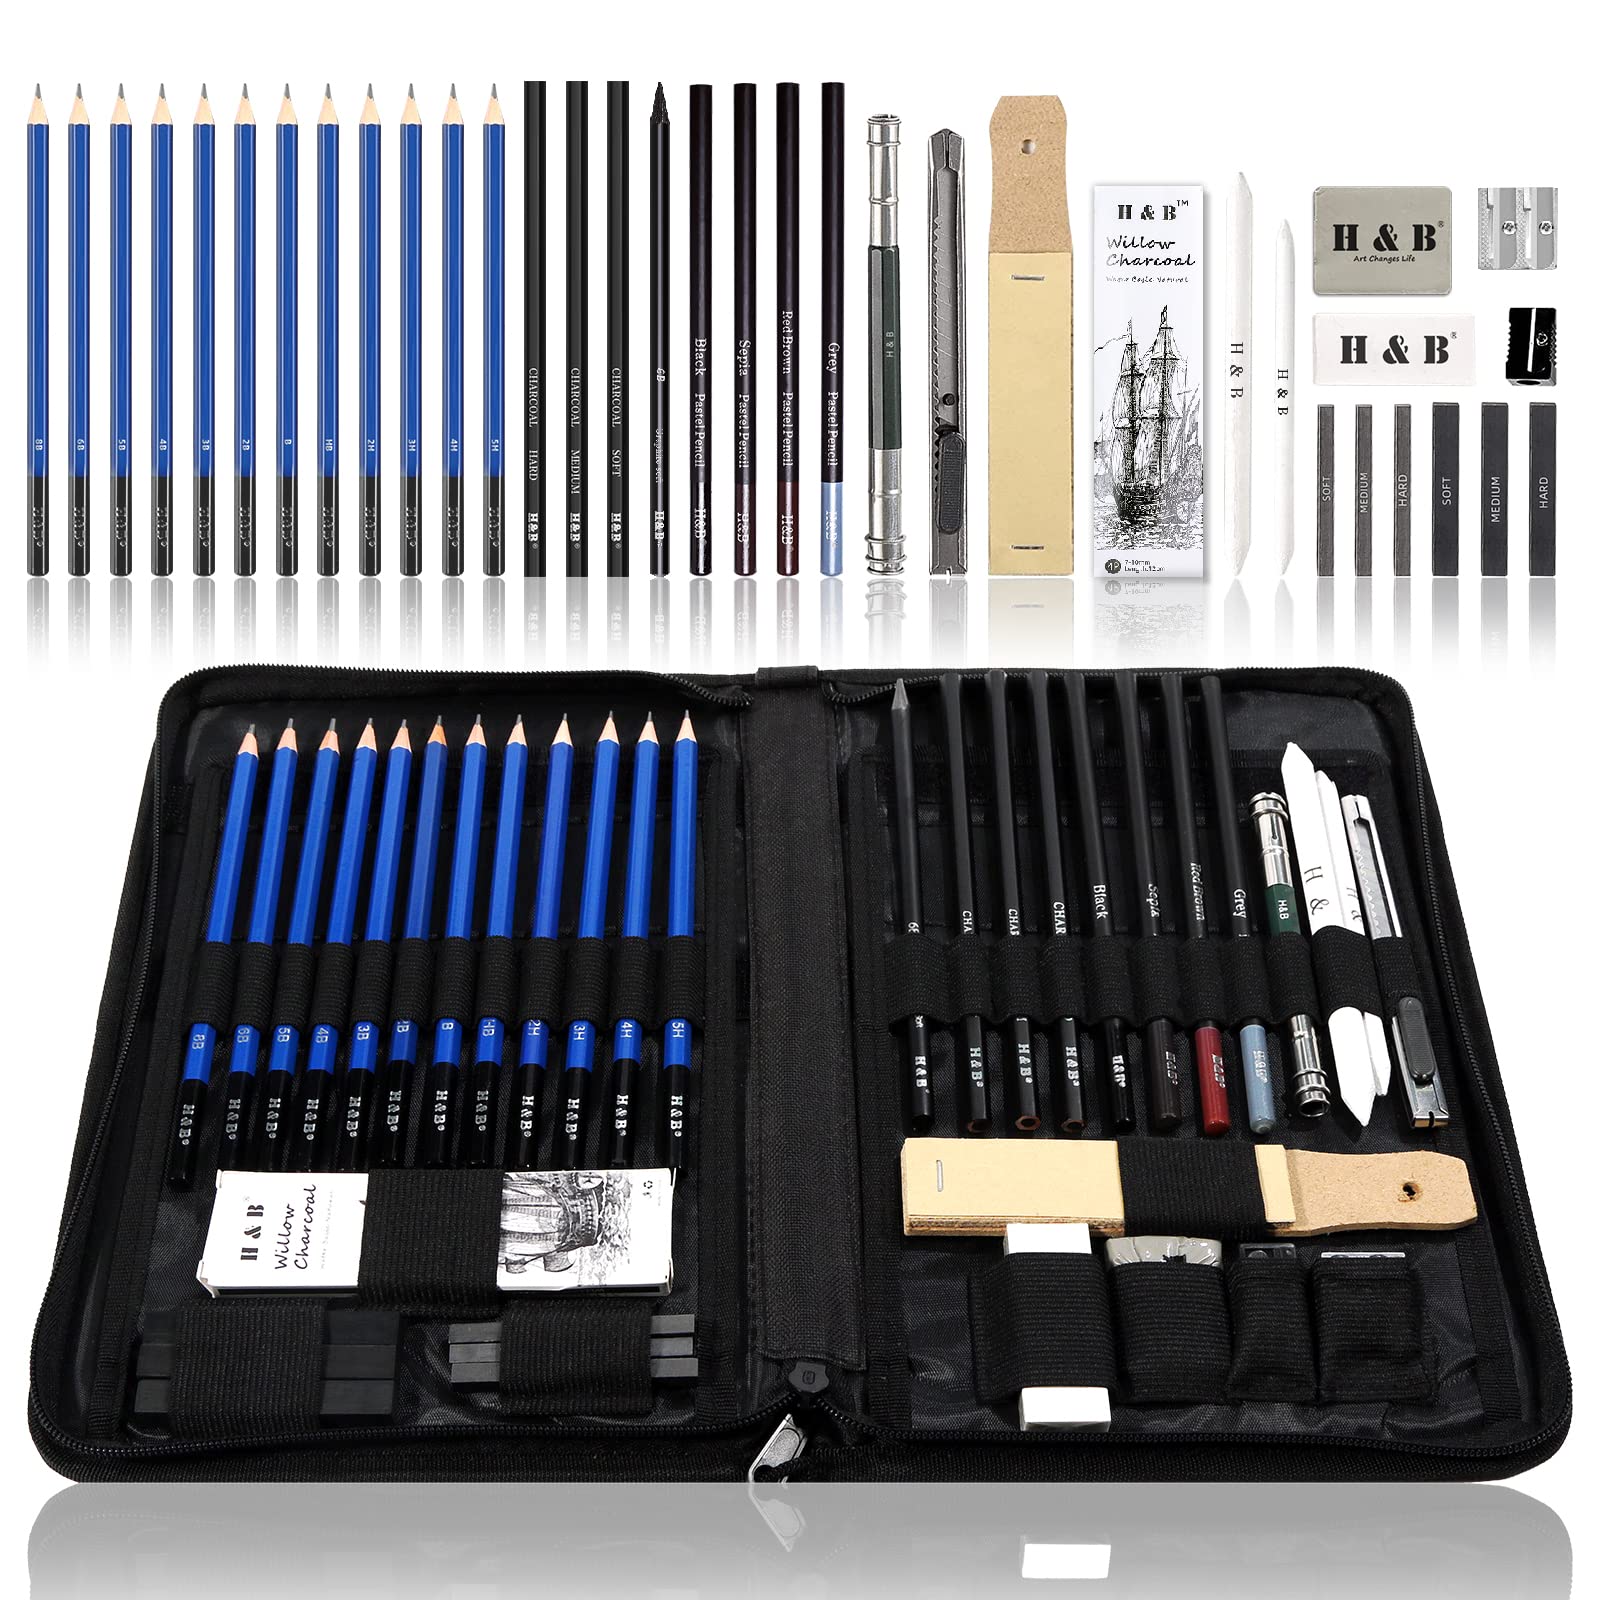 Book Cover H & B Drawing Pencils Set, 40-Piece Sketch Pencils and Drawing Kit Complete Artist Kit Includes Graphite Pencils, Pastel Pencils, Sharpener & Eraser, Professional Sketching Pencils Set for Drawing 40 Piece Set